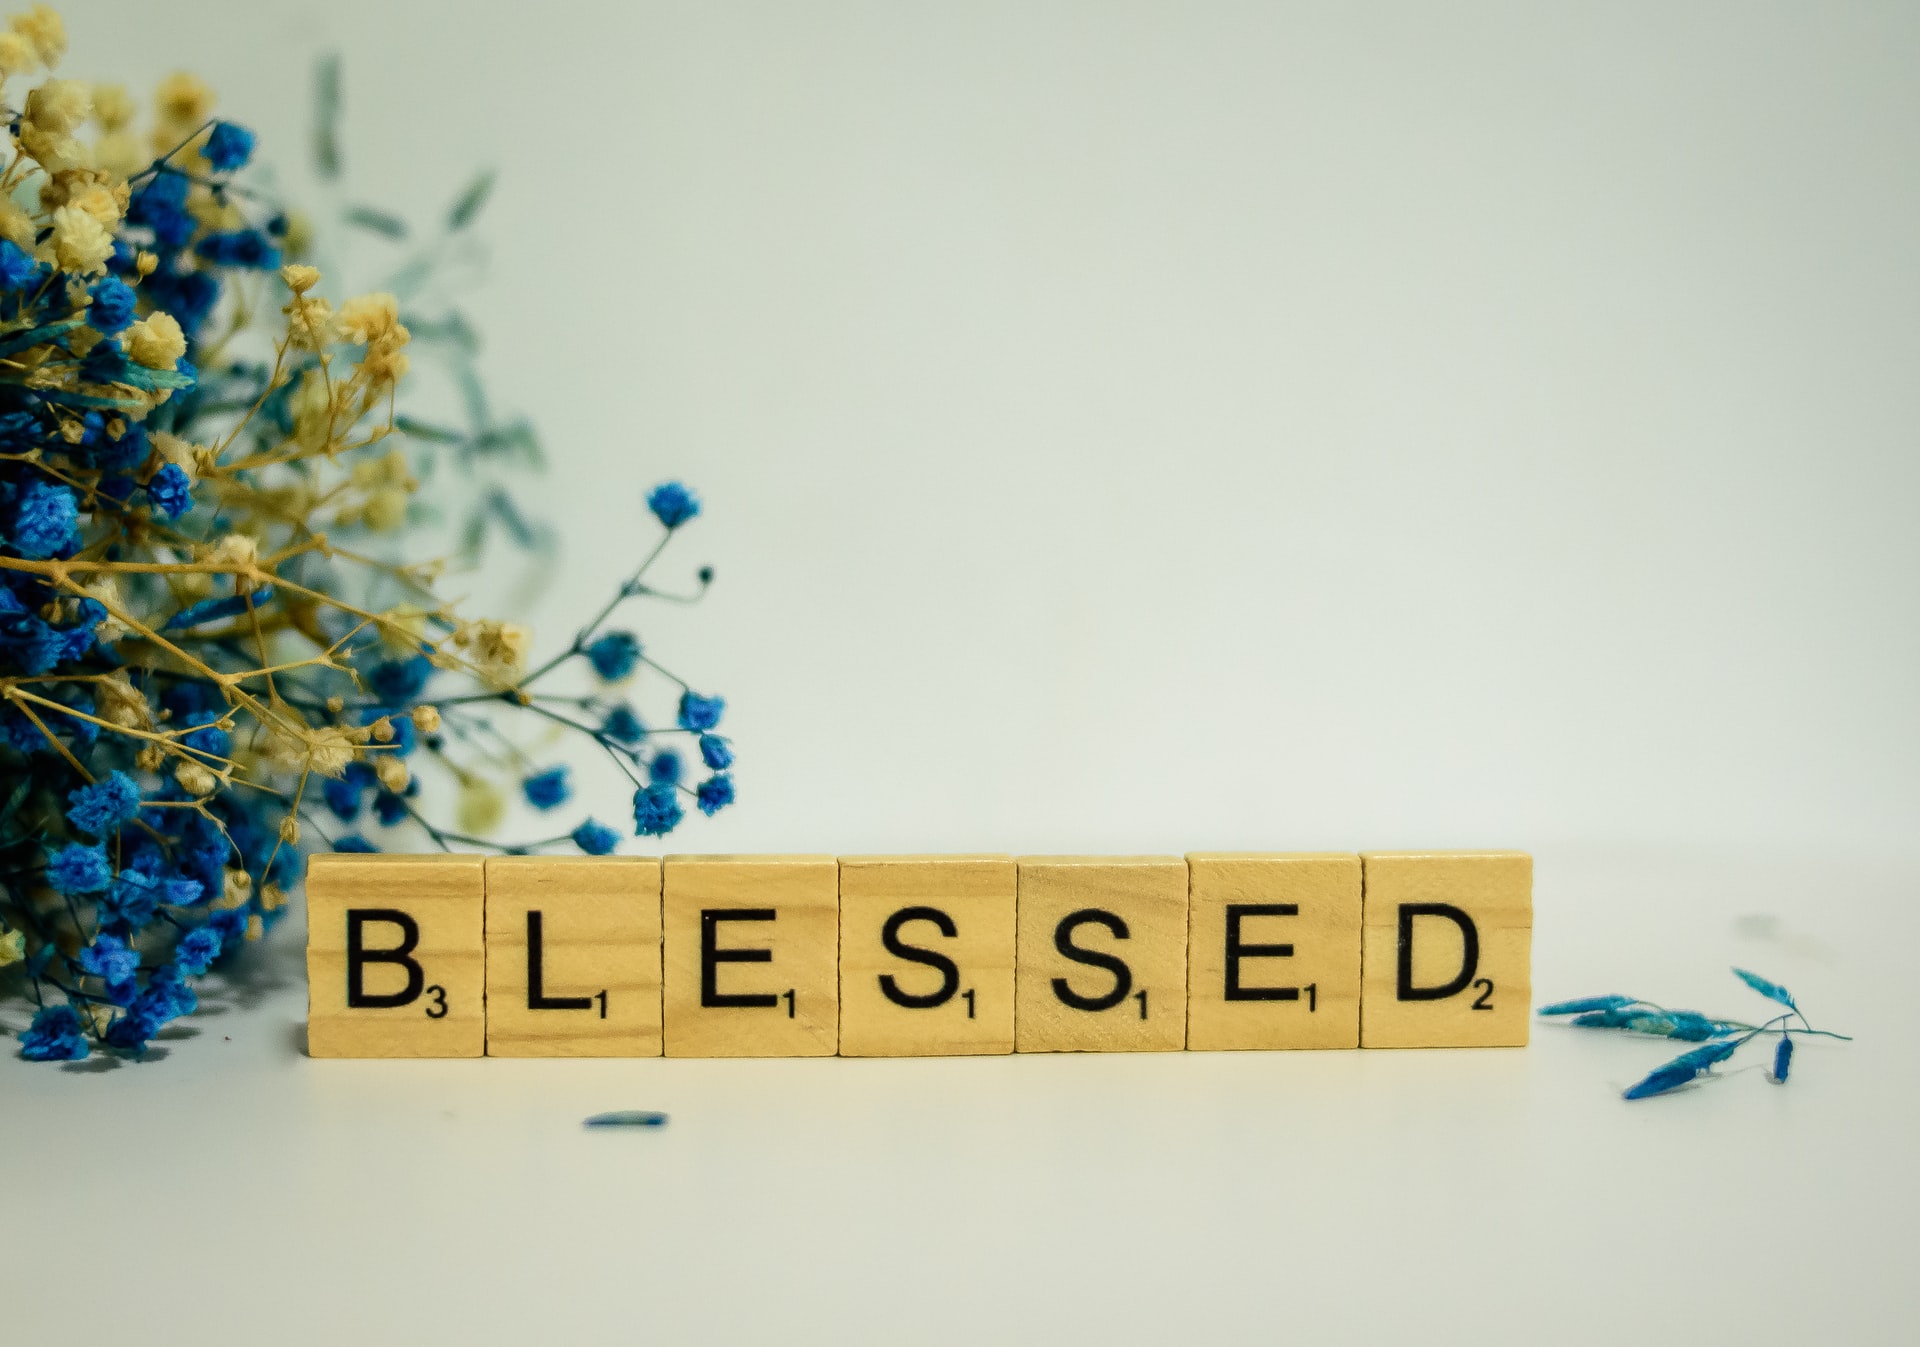 Blessed beyond measure is a verse we often hear when we talk about how gracious and kind god is by giving us all the things we need and desire.